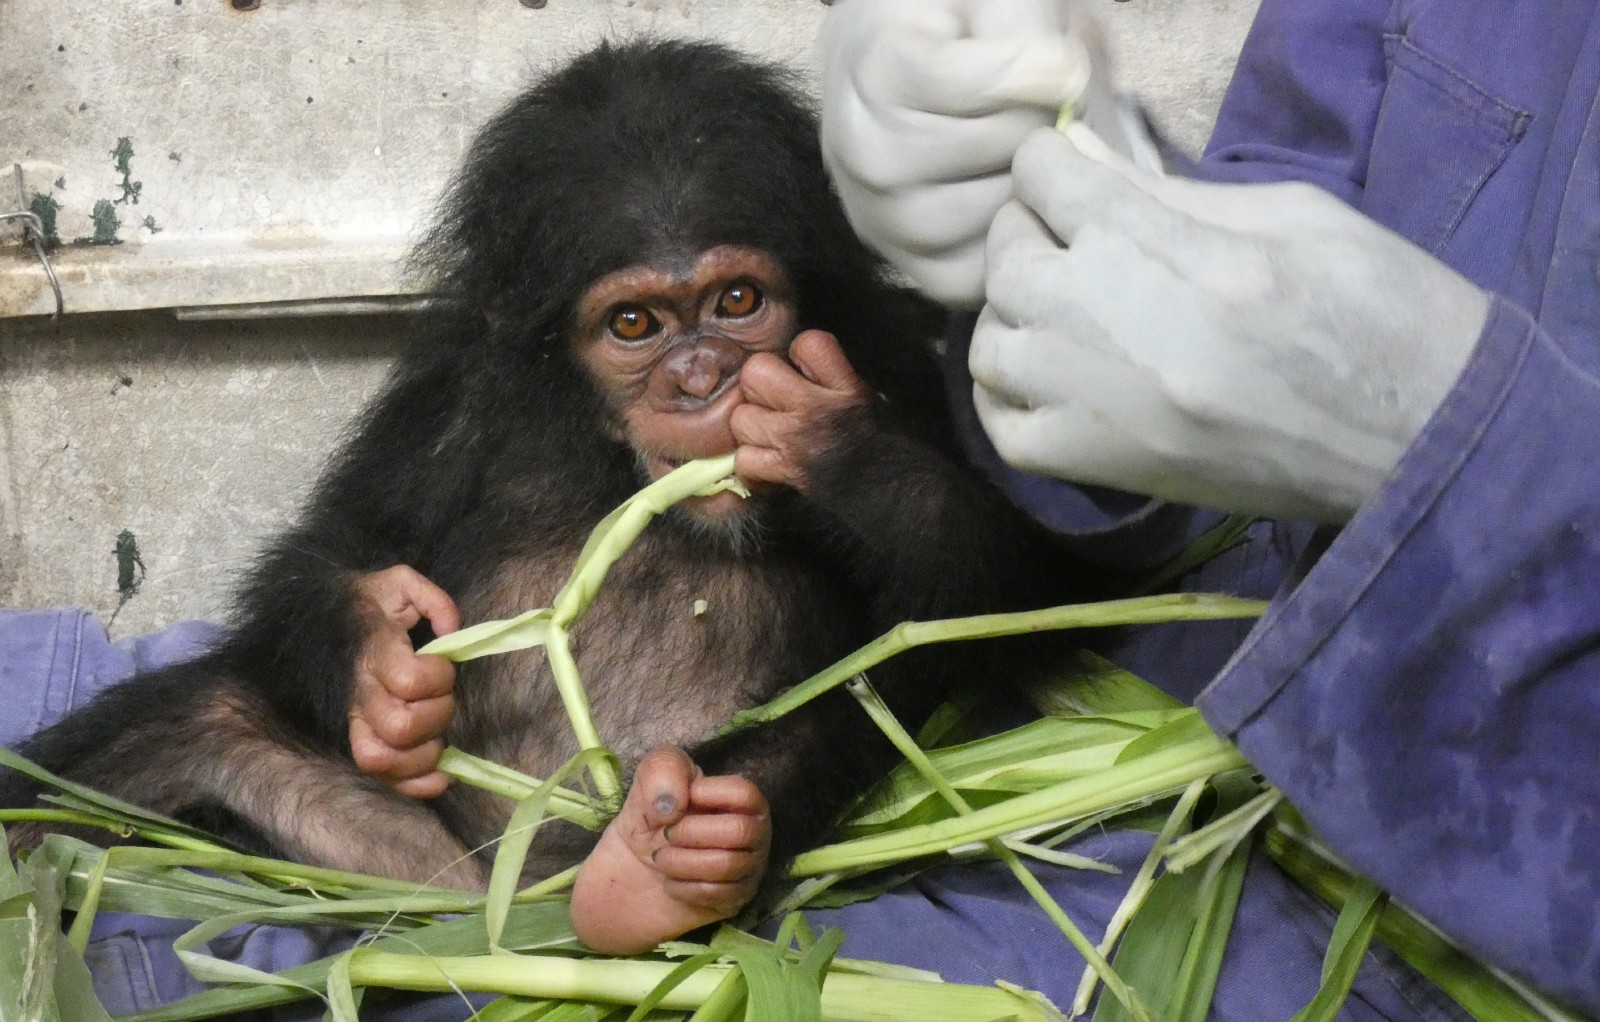 A baby chimp being cared for by a sanctuary vet, sitting surrounded by leaves